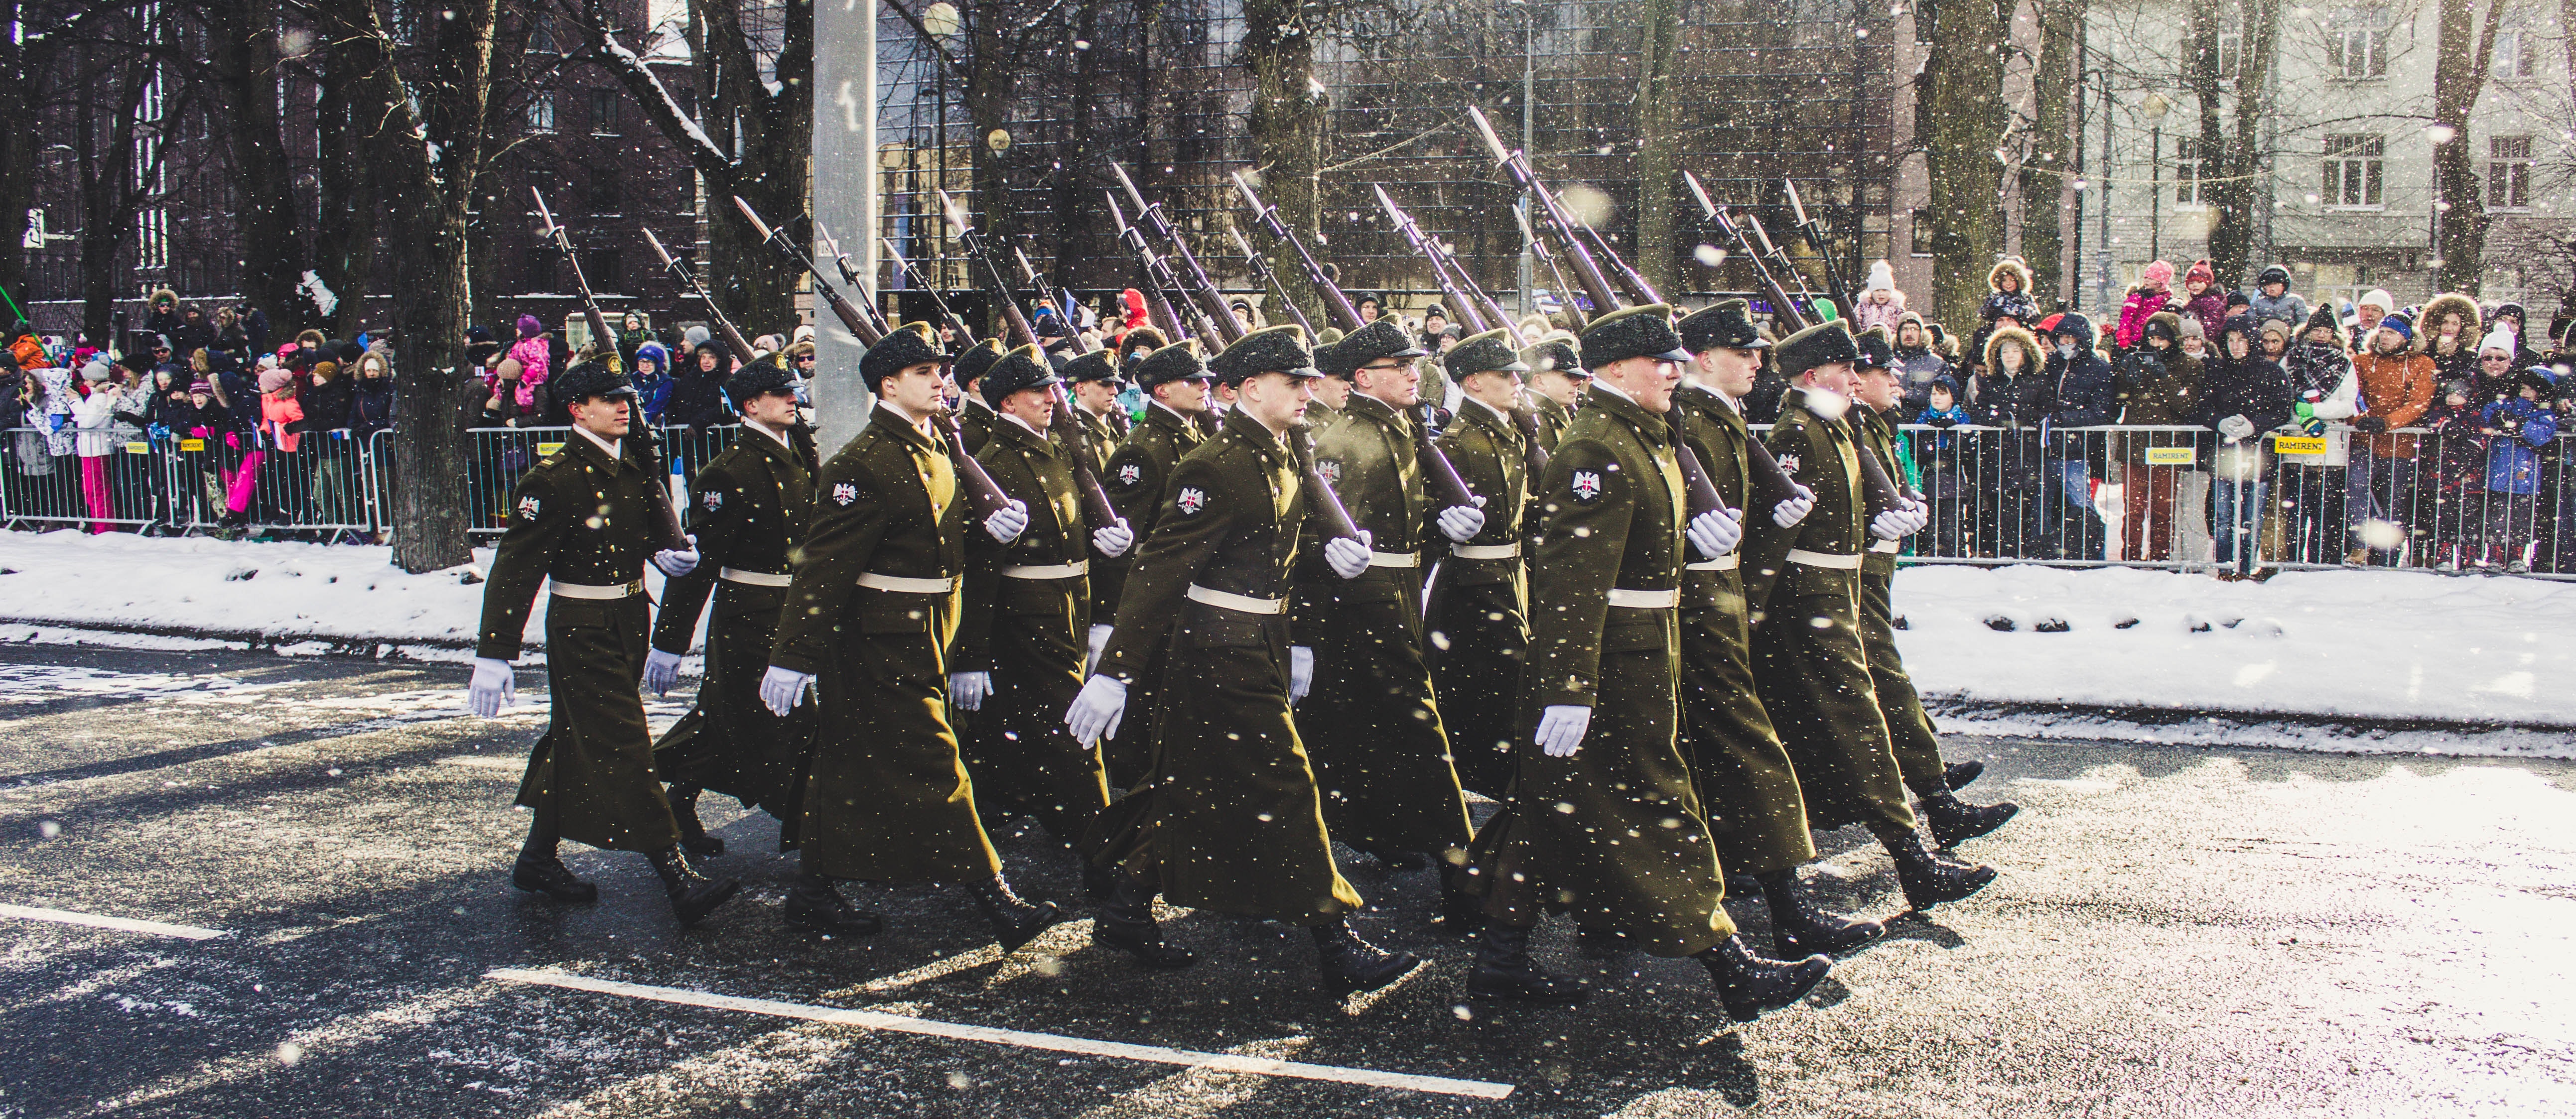 Group of soldiers parading on concrete road photo